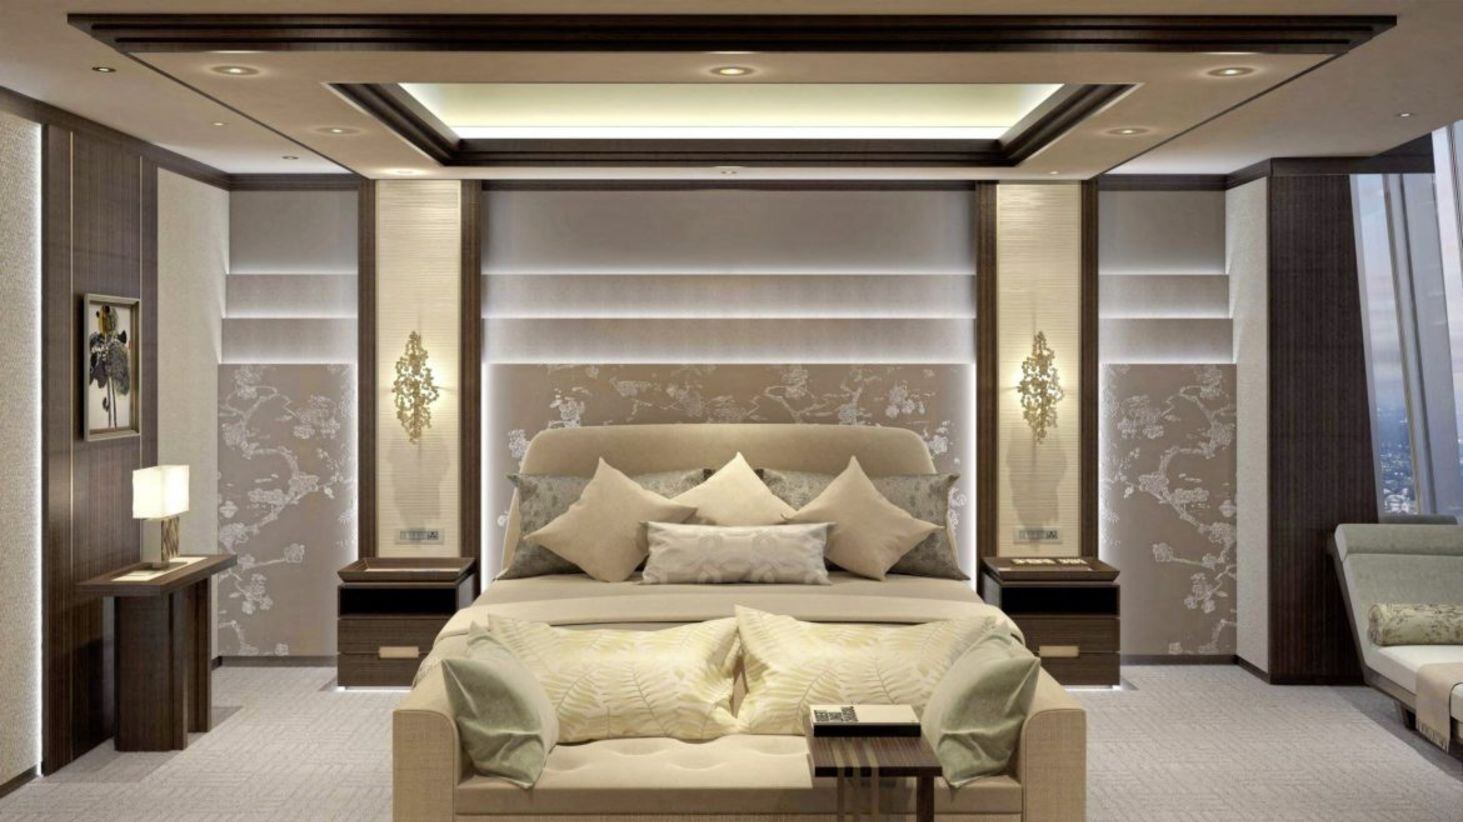  McCue completed the fit-out of the three Signature Suites in the Shangri-La Hotel, at The Shard, London 